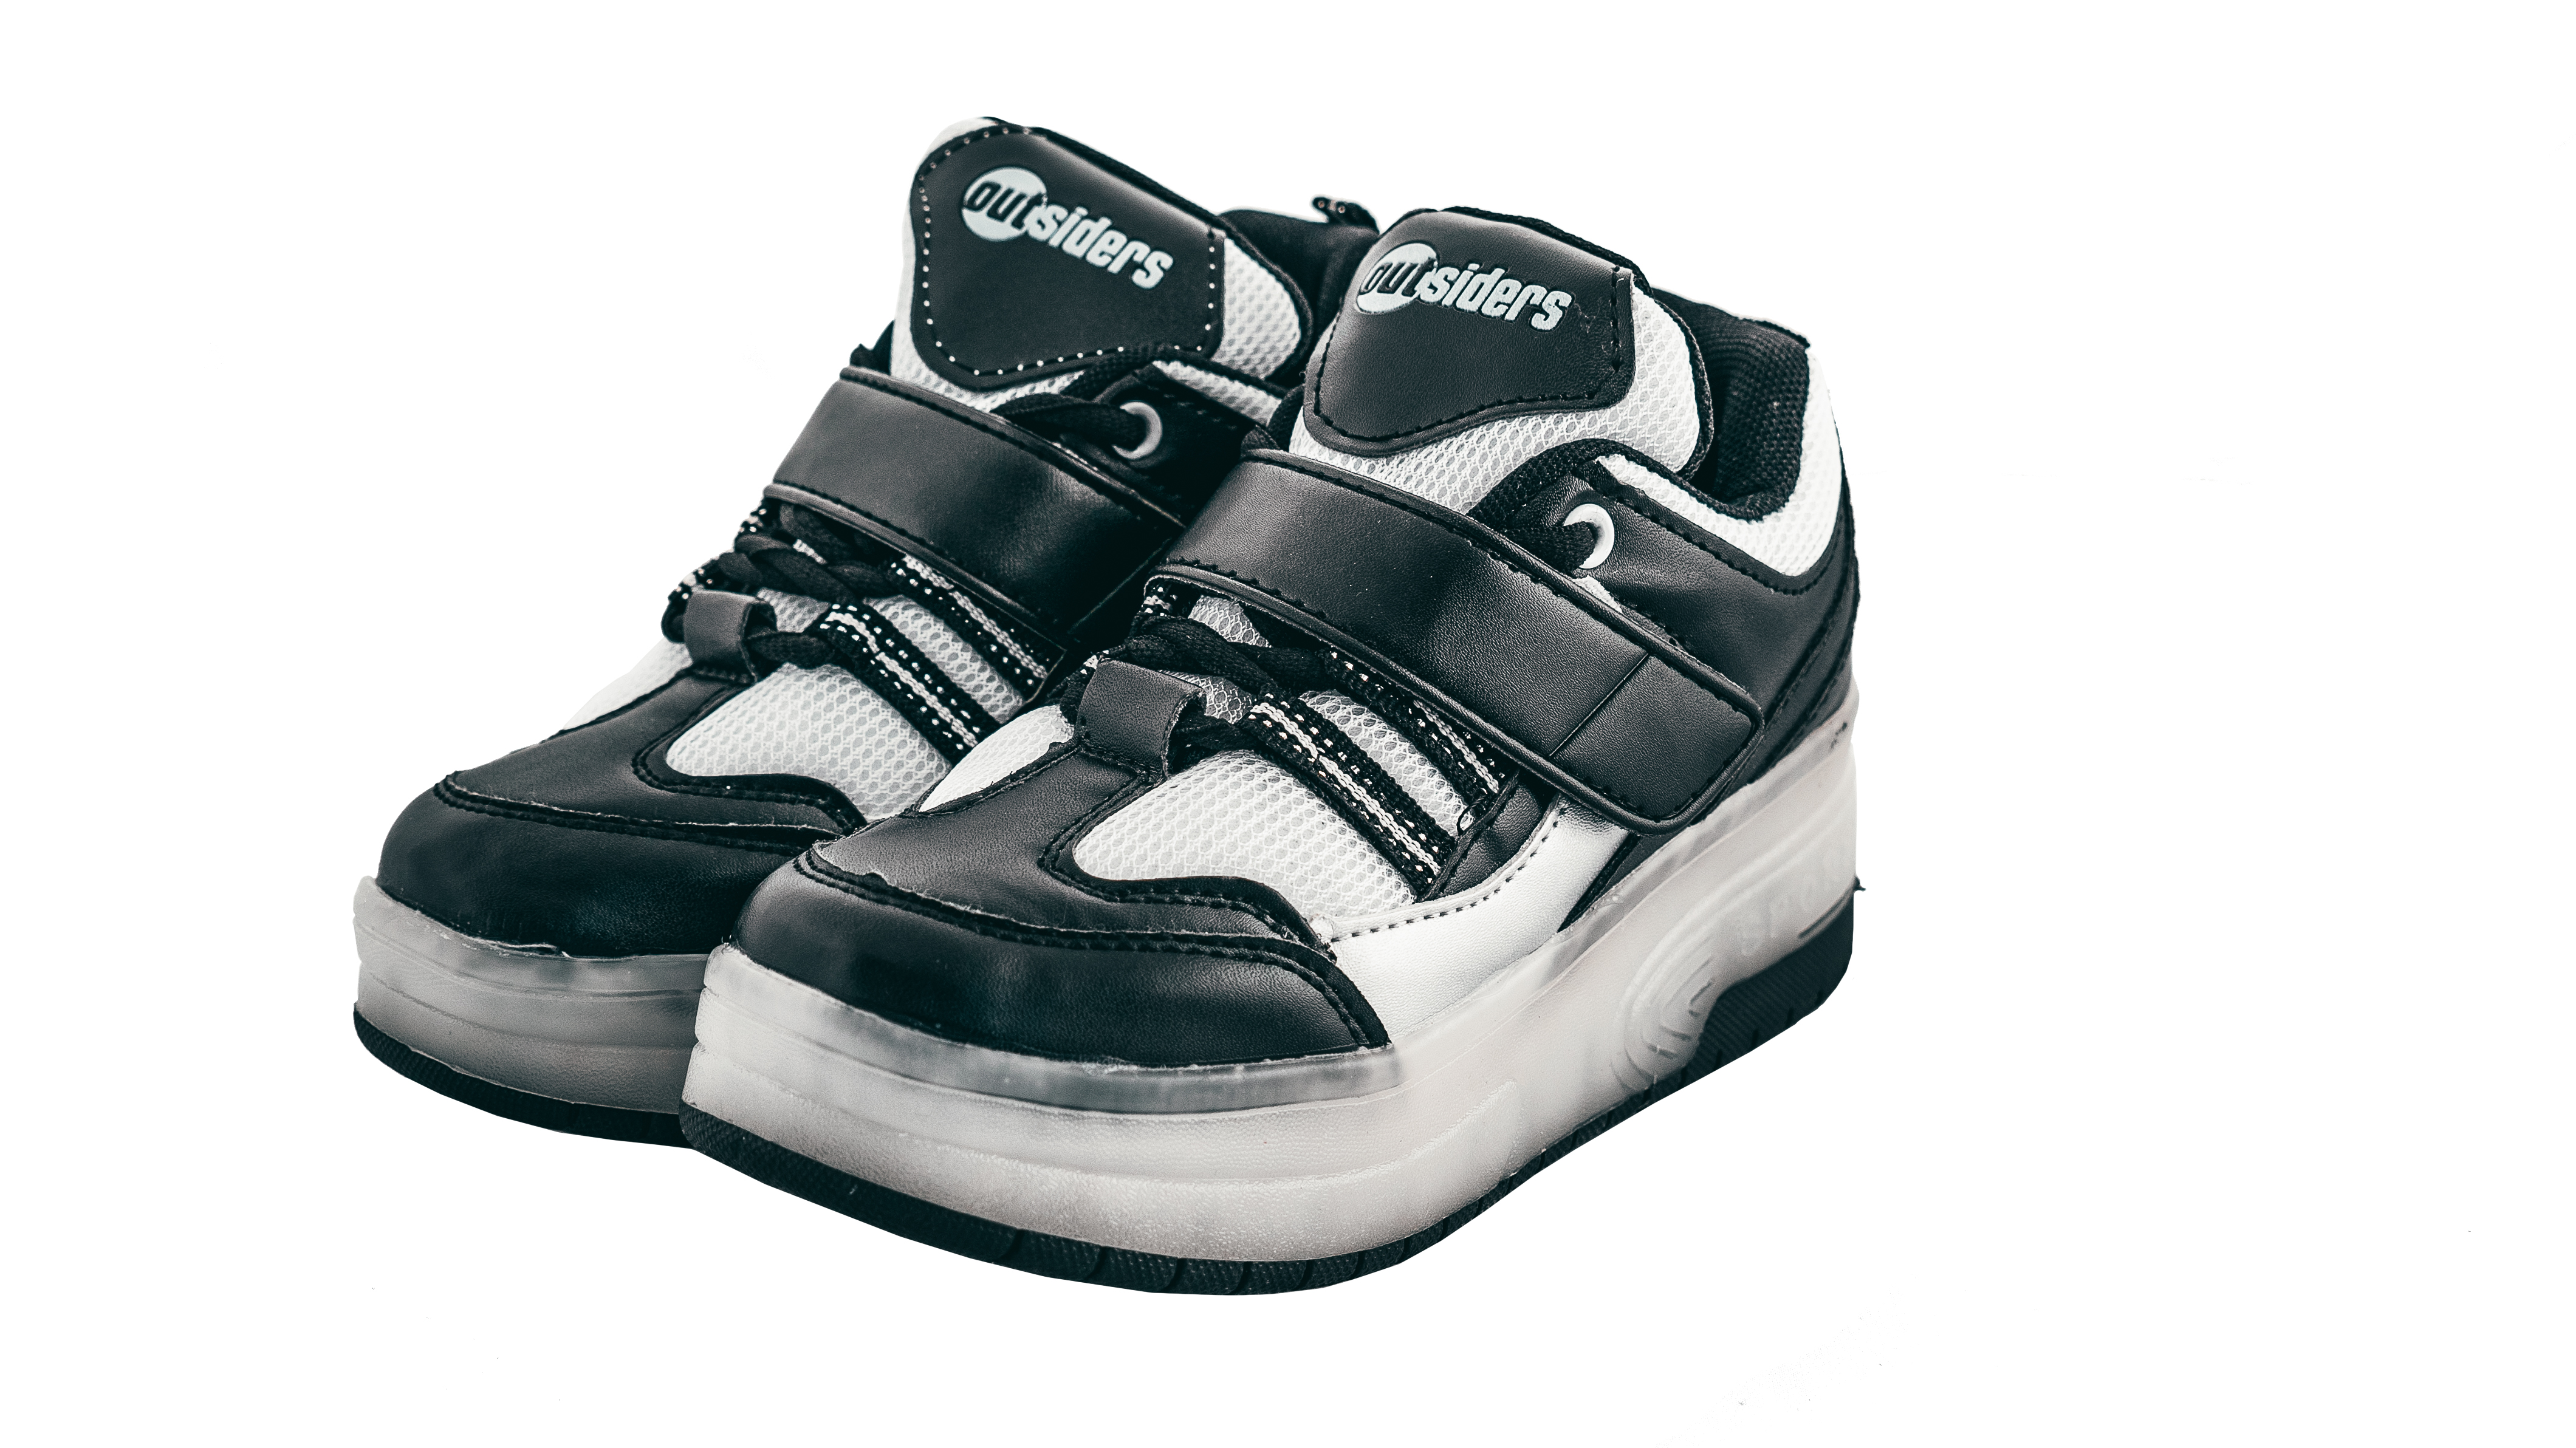 Outsiders - Roller Shoes Black/Silver 